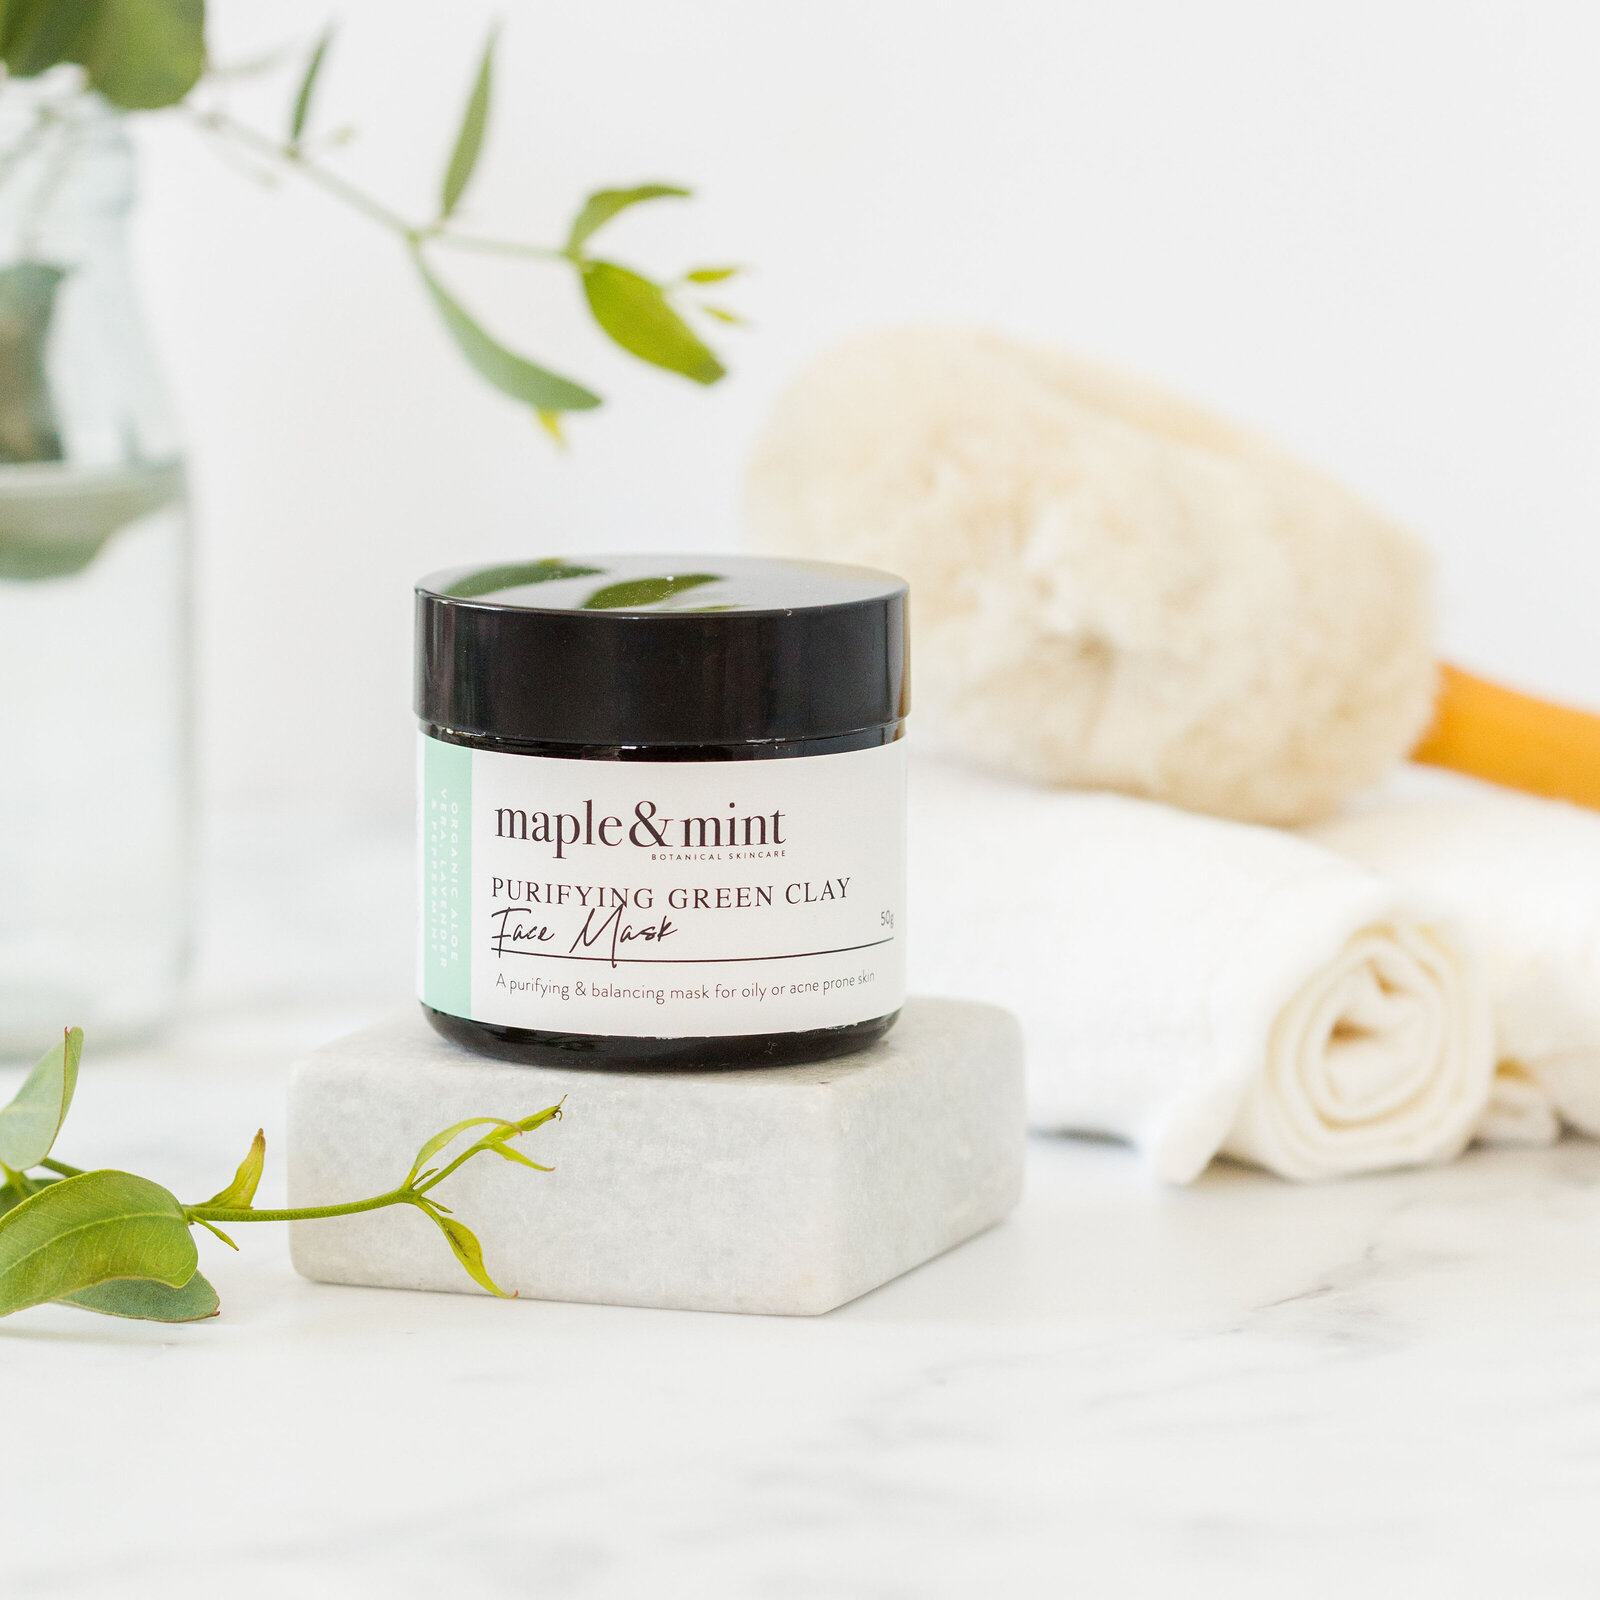 Commercial styled skincare photography for clean natural luxe brand by San Diego product photographer Chelsea Loren